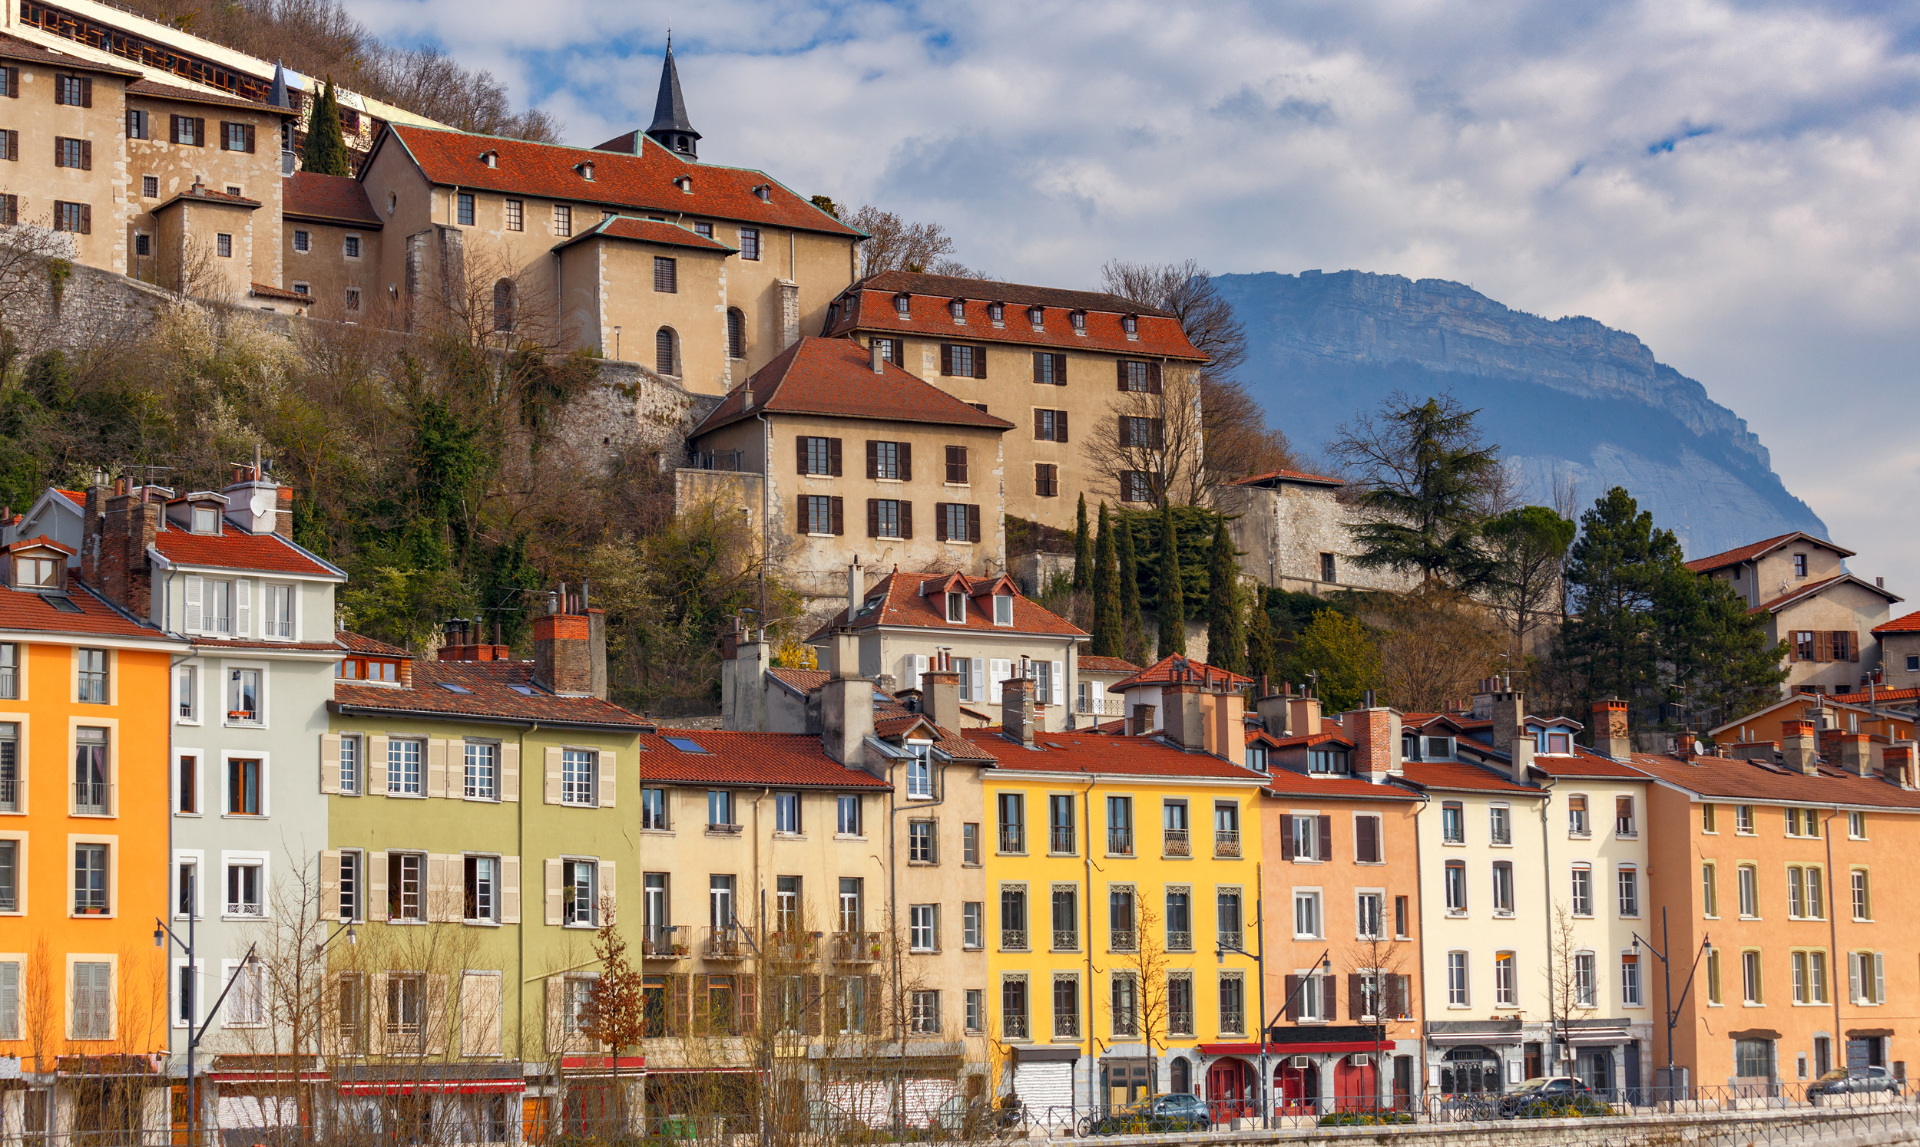 View of Grenoble, with mountains in the background